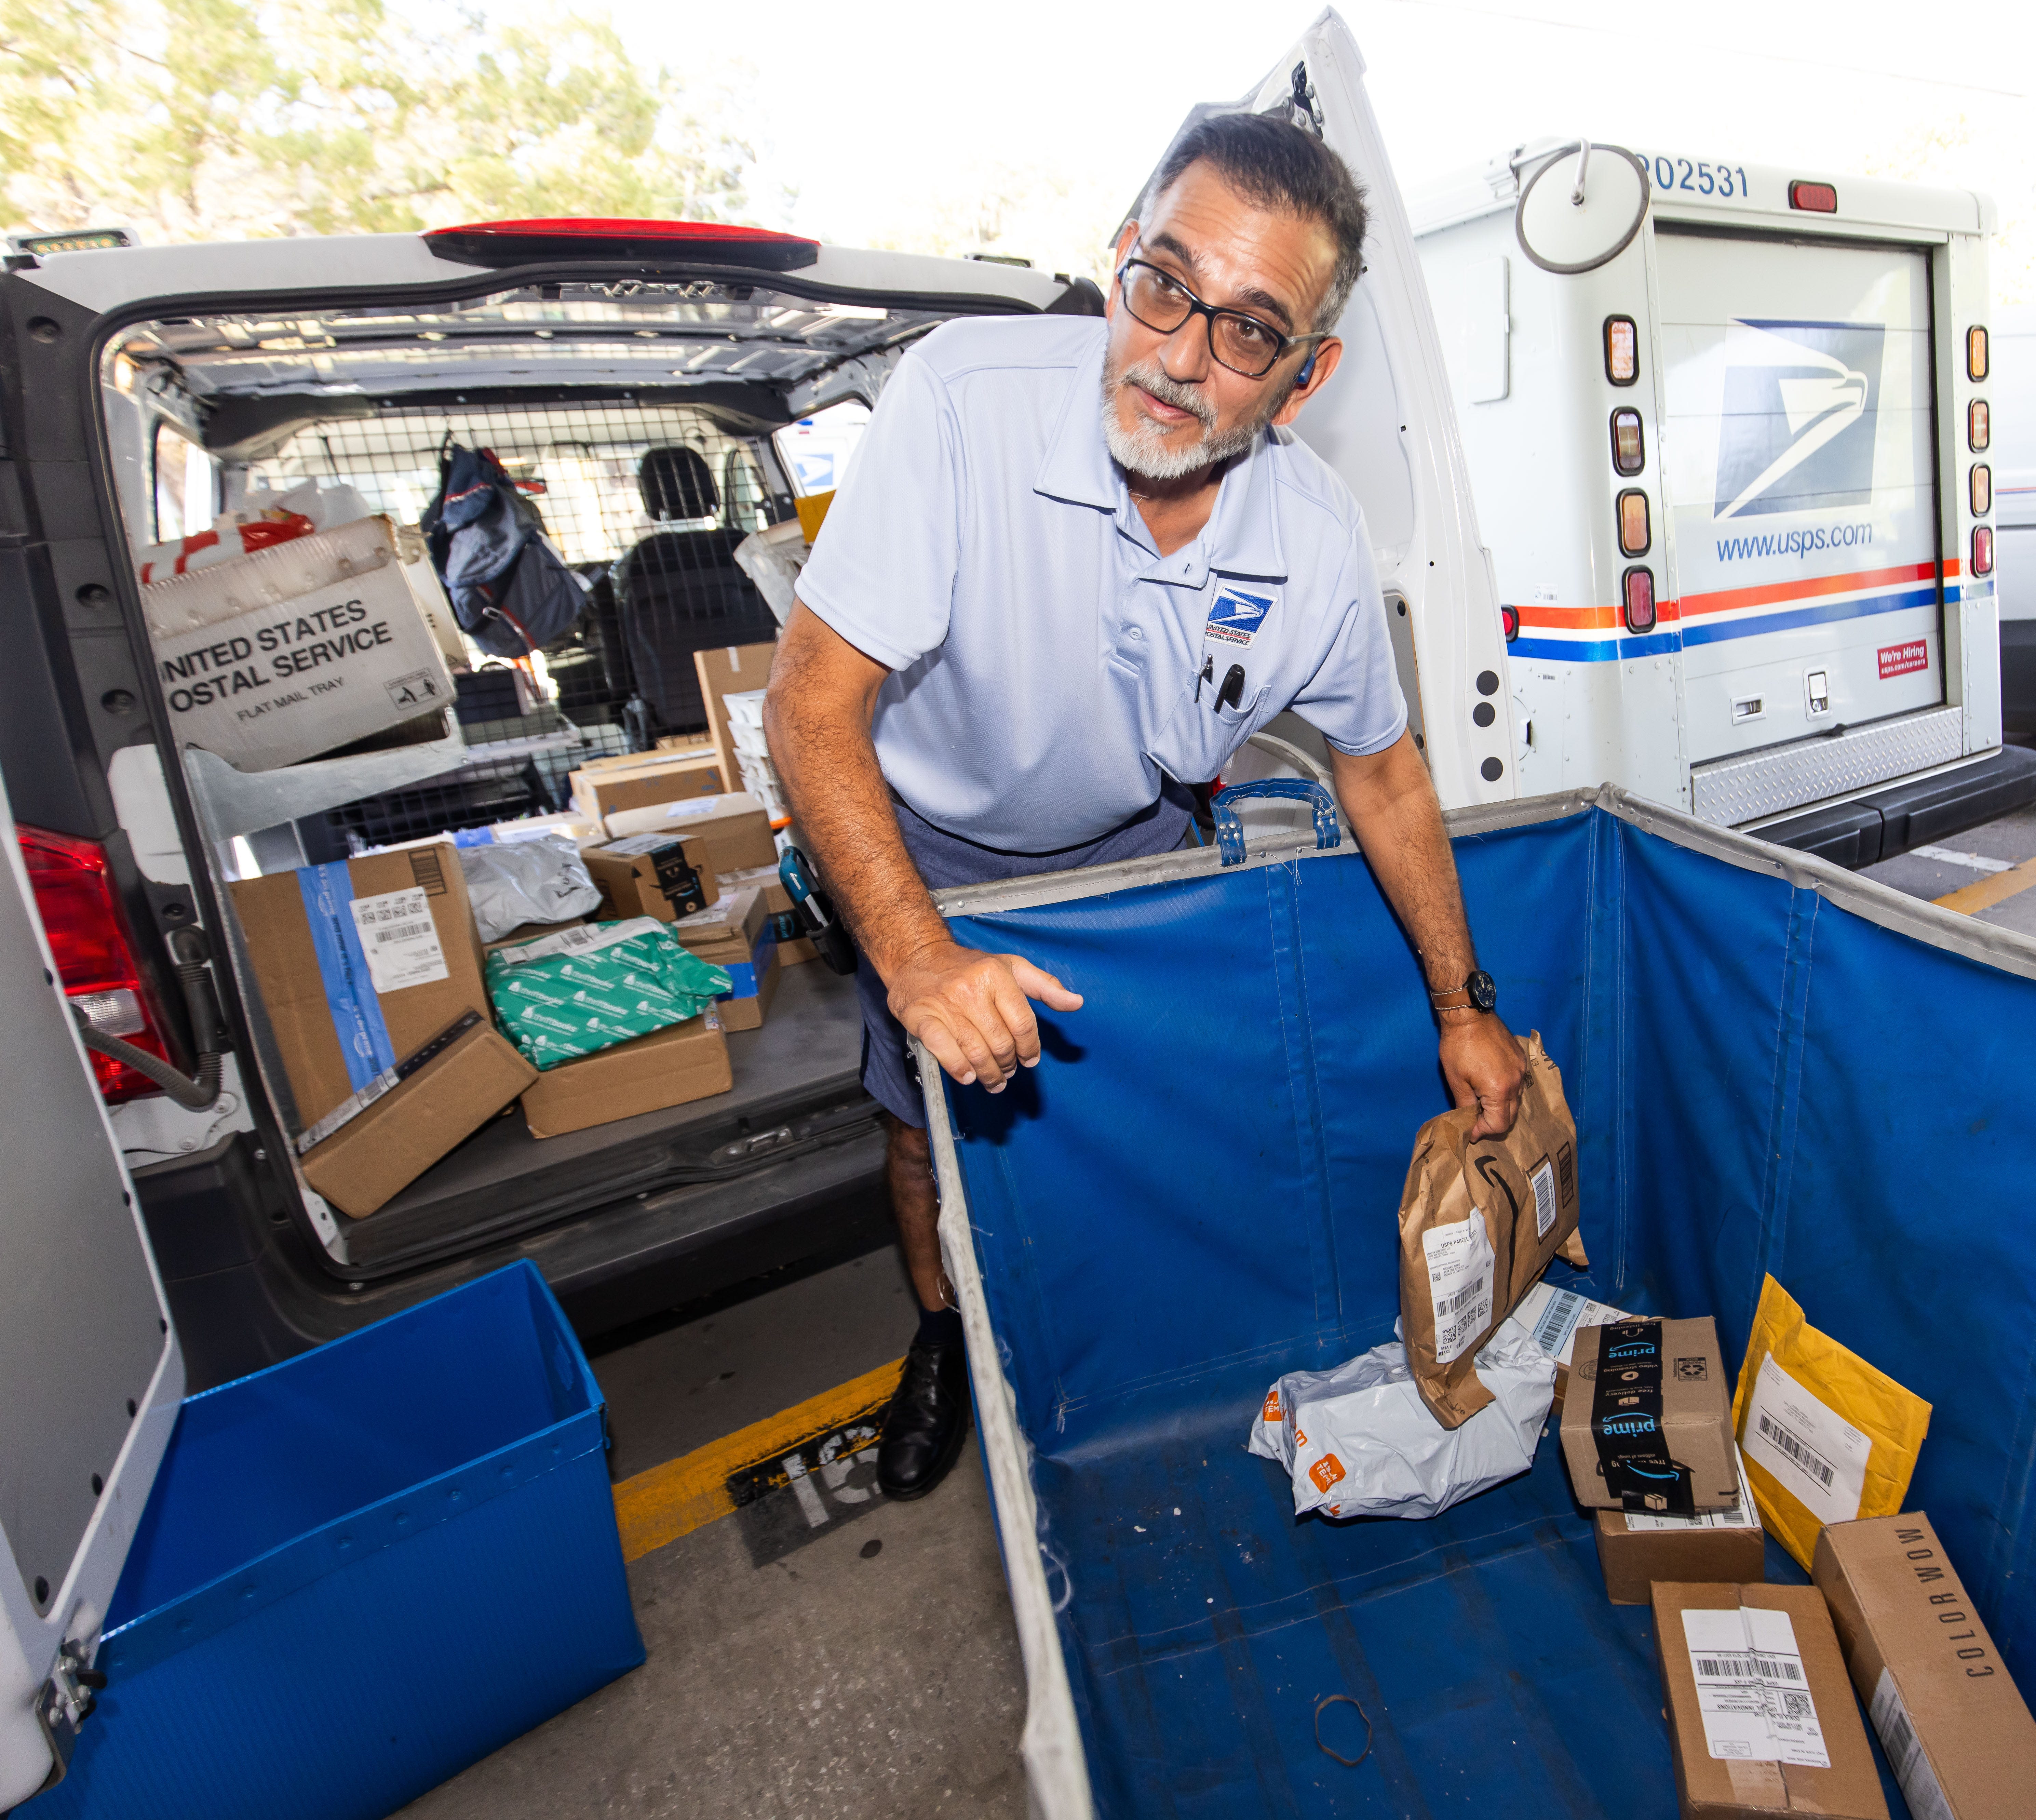 U.S. Postal Service, and you, can help Stamp Out Hunger in Ocala on May 11